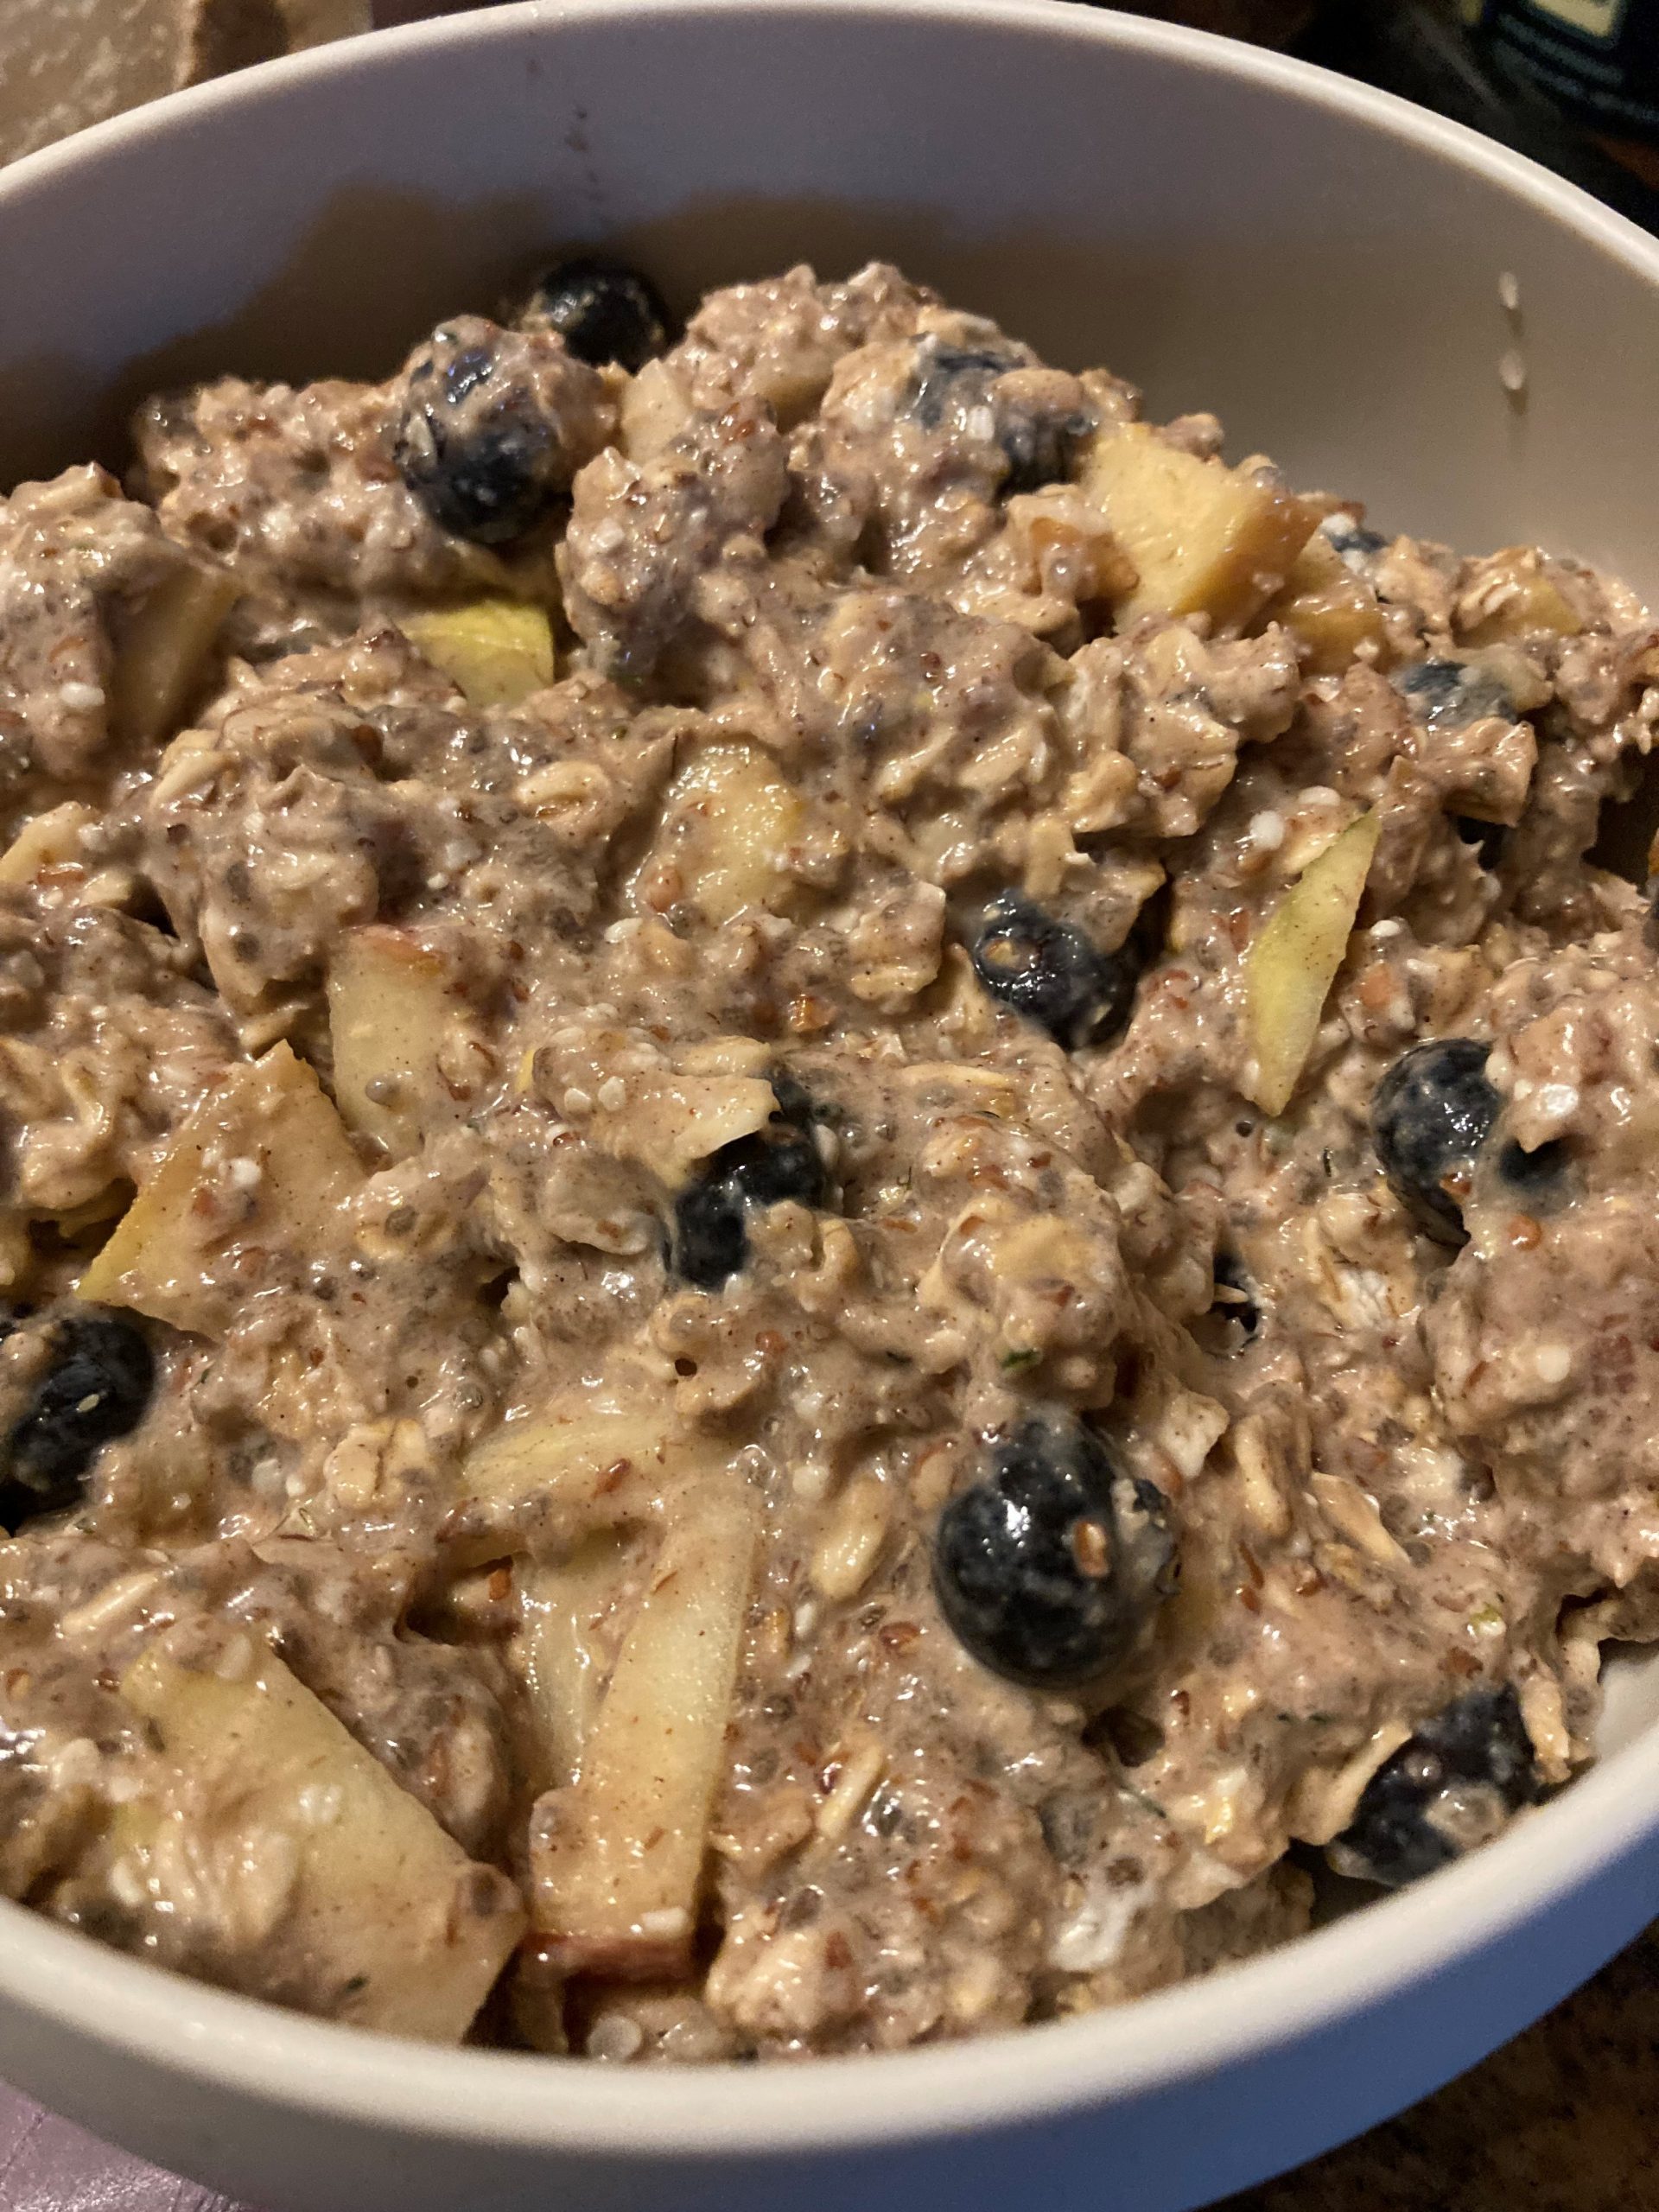 https://www.docfcu.org/wp-content/uploads/overnight-oats1-scaled.jpg